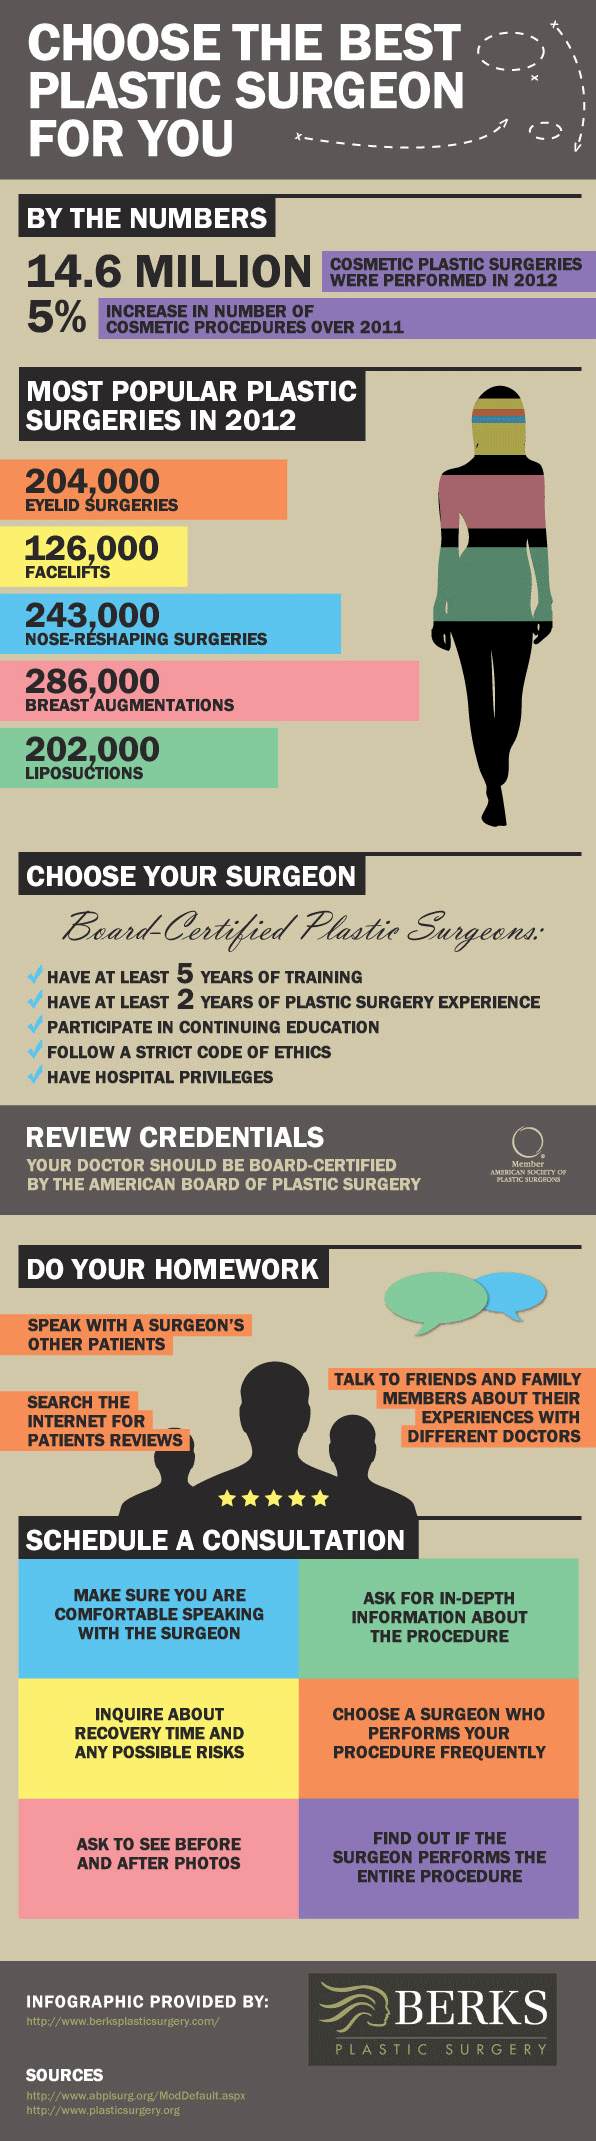 How to Choose Your Plastic Surgeon Infographic